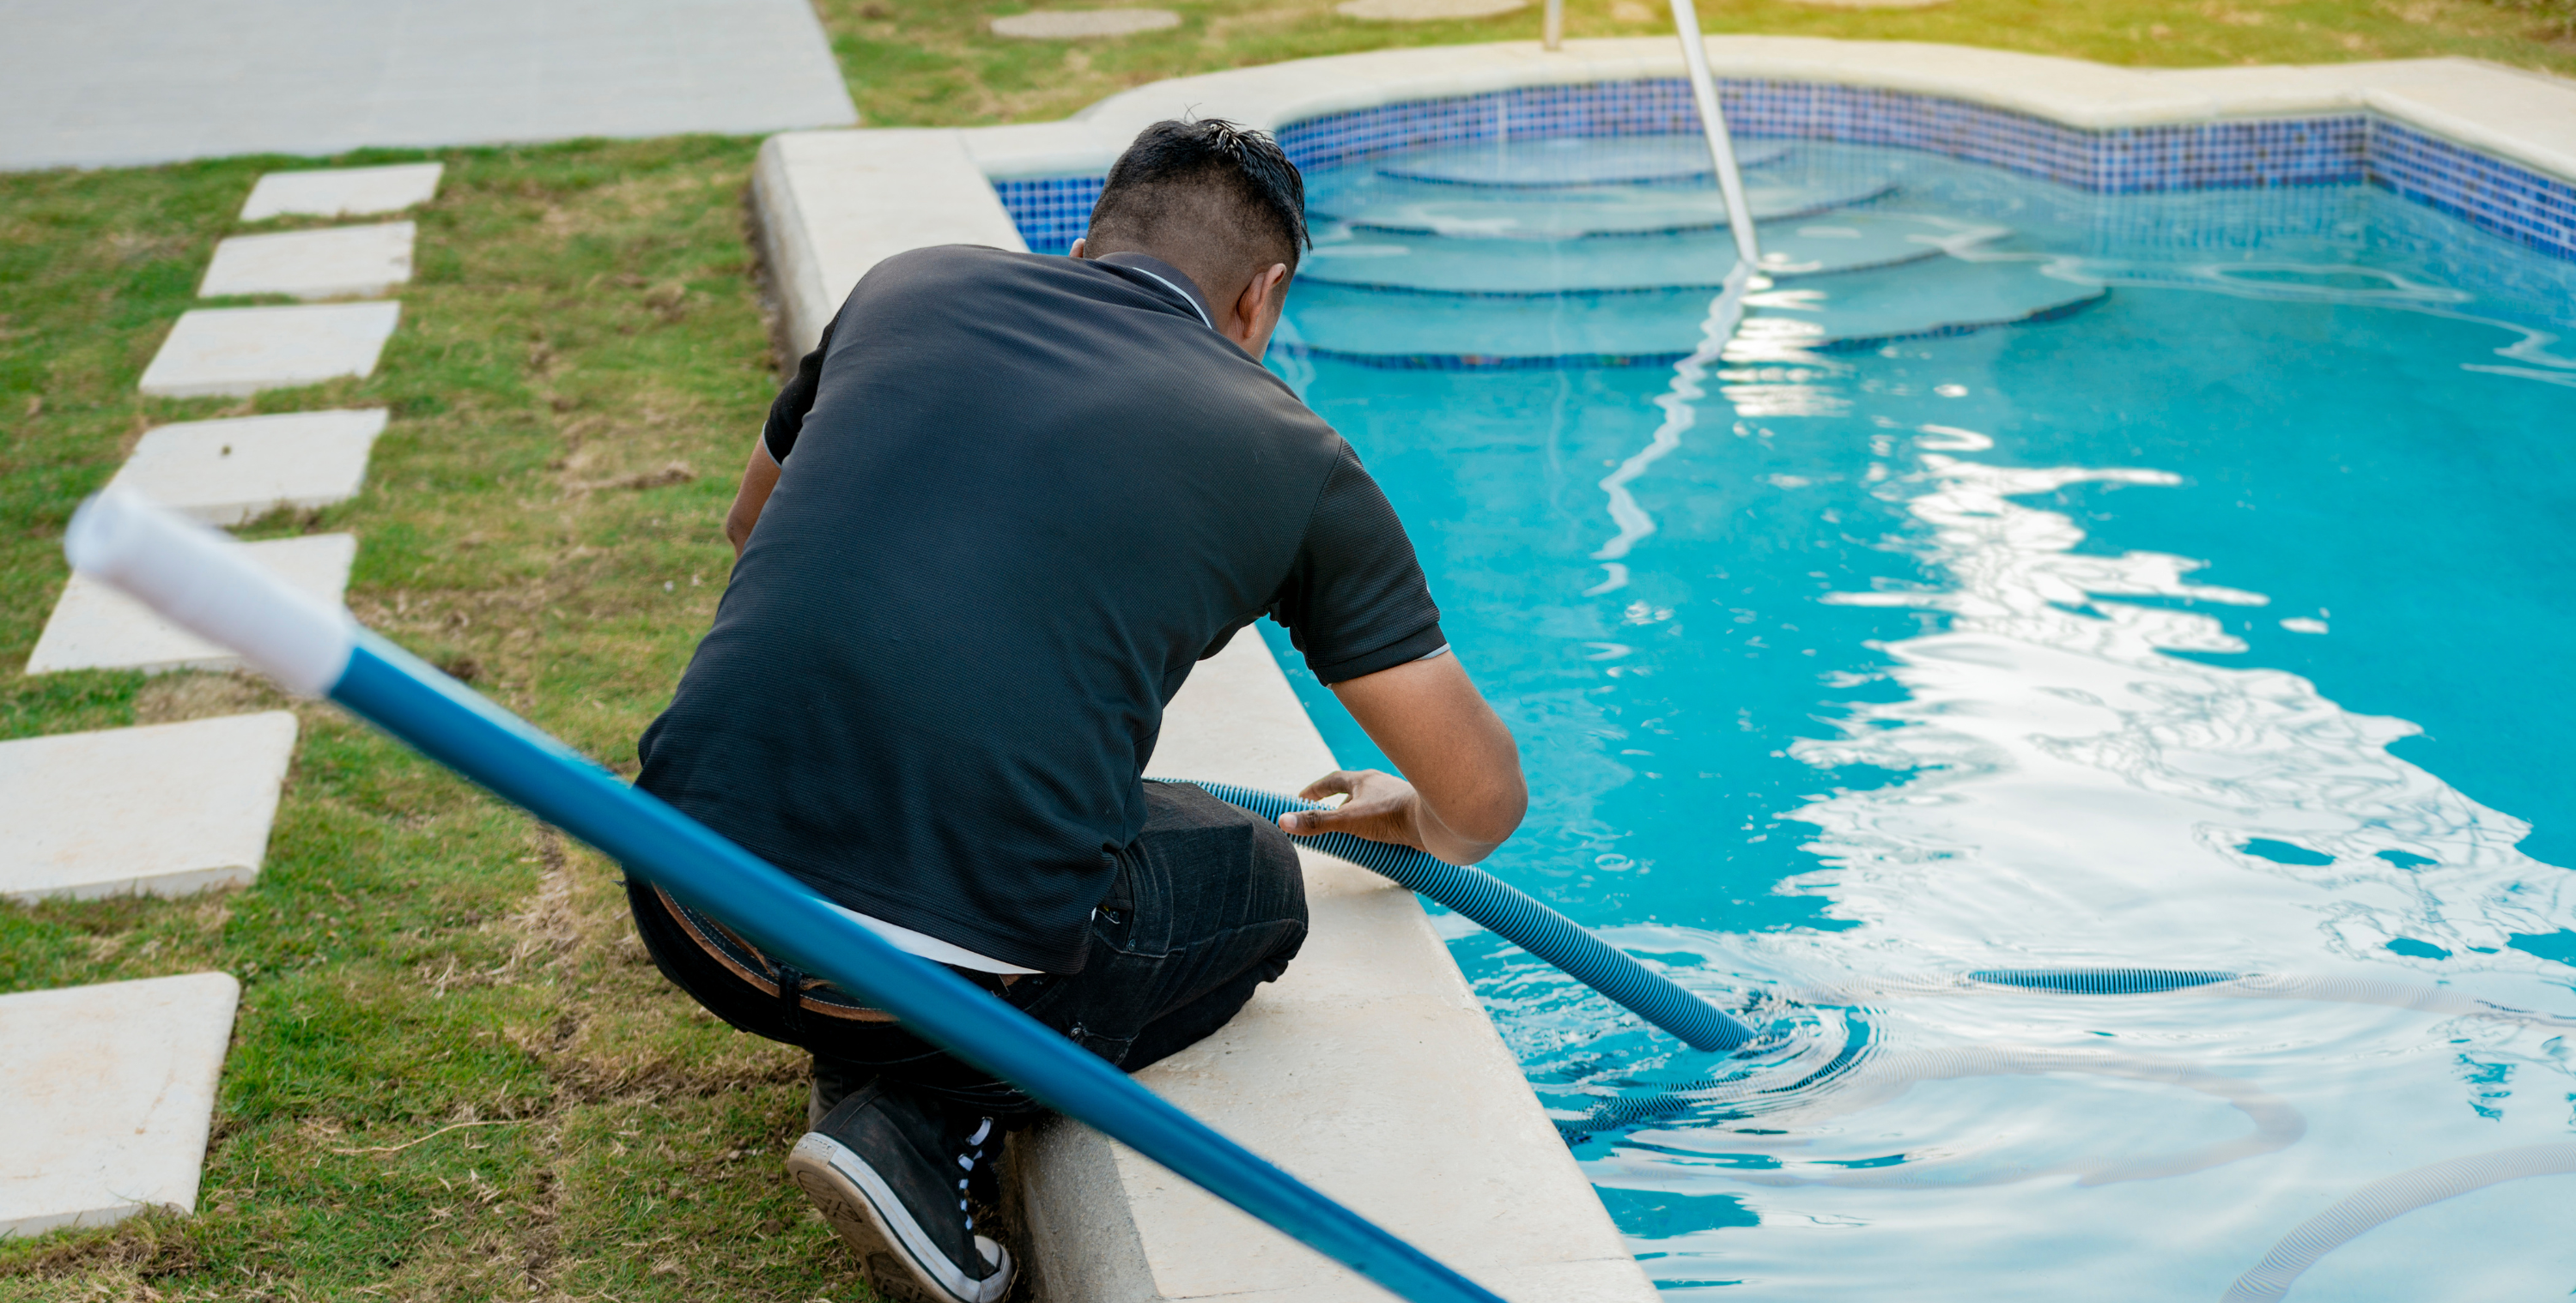 Weekly Pool Service Helps Maximize Your Pool's Lifespan